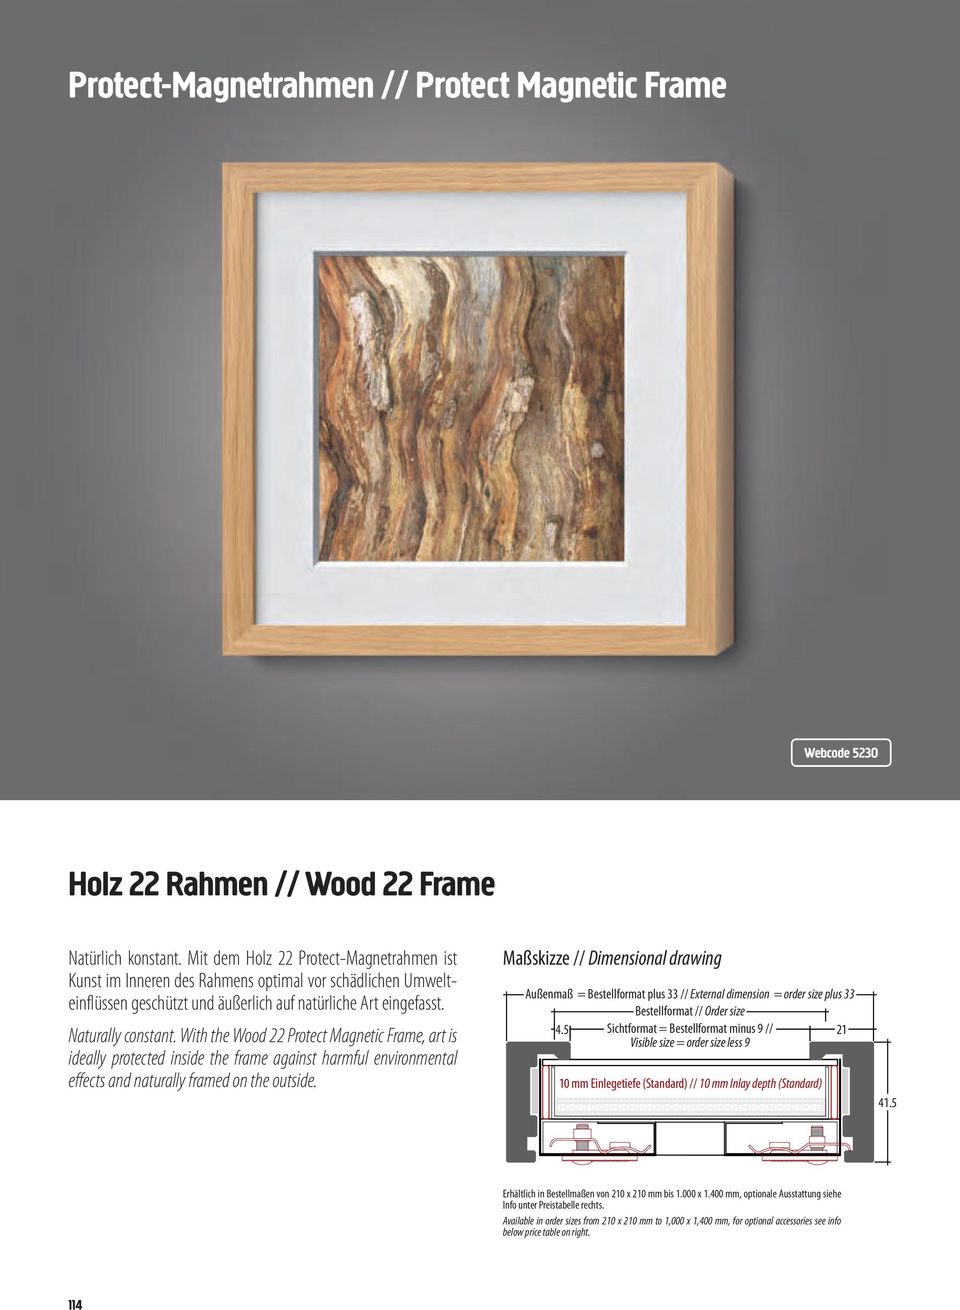 With the Wood 22 Protect Magnetic Frame, art is ideally protected inside the frame against harmful environmental effects and naturally framed on the outside.